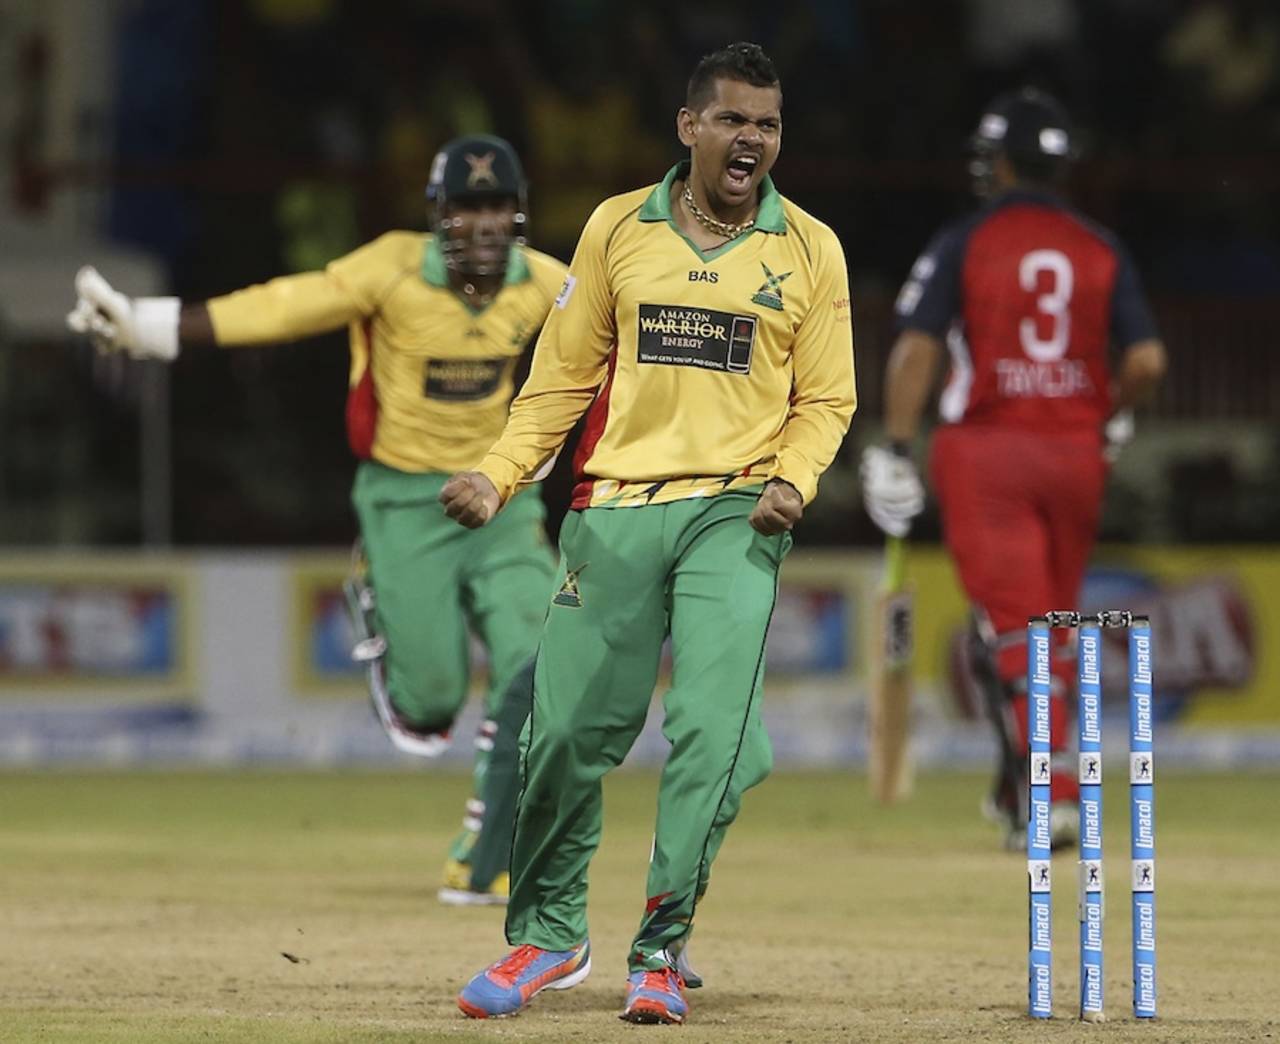 Sunil Narine: "We have a lot tied to that [Red Steel] team"&nbsp;&nbsp;&bull;&nbsp;&nbsp;LatinContent/Getty Images